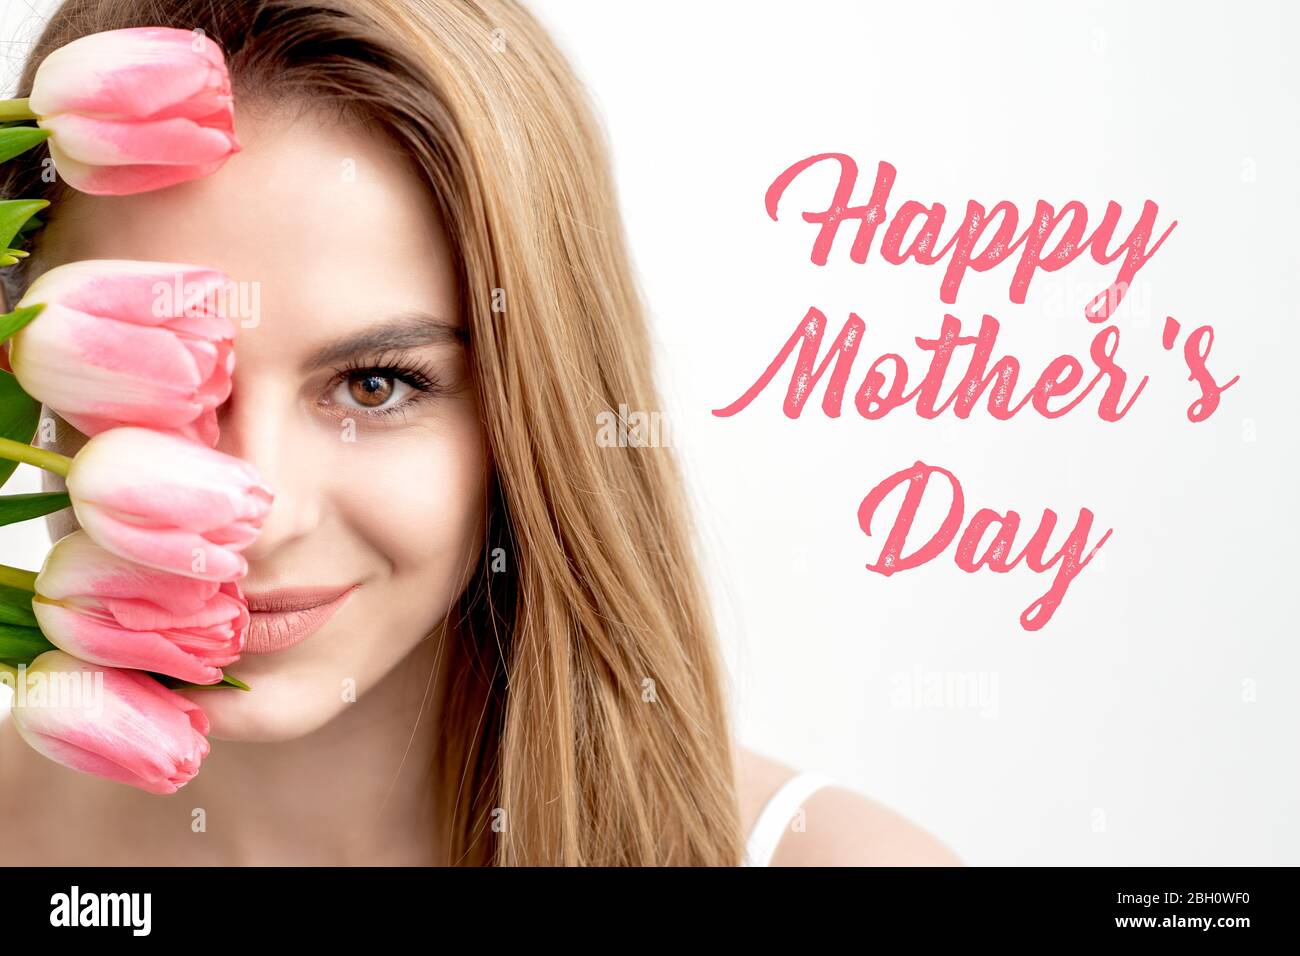 Happy Mother's Day pink text sign and portrait of smiling young ...